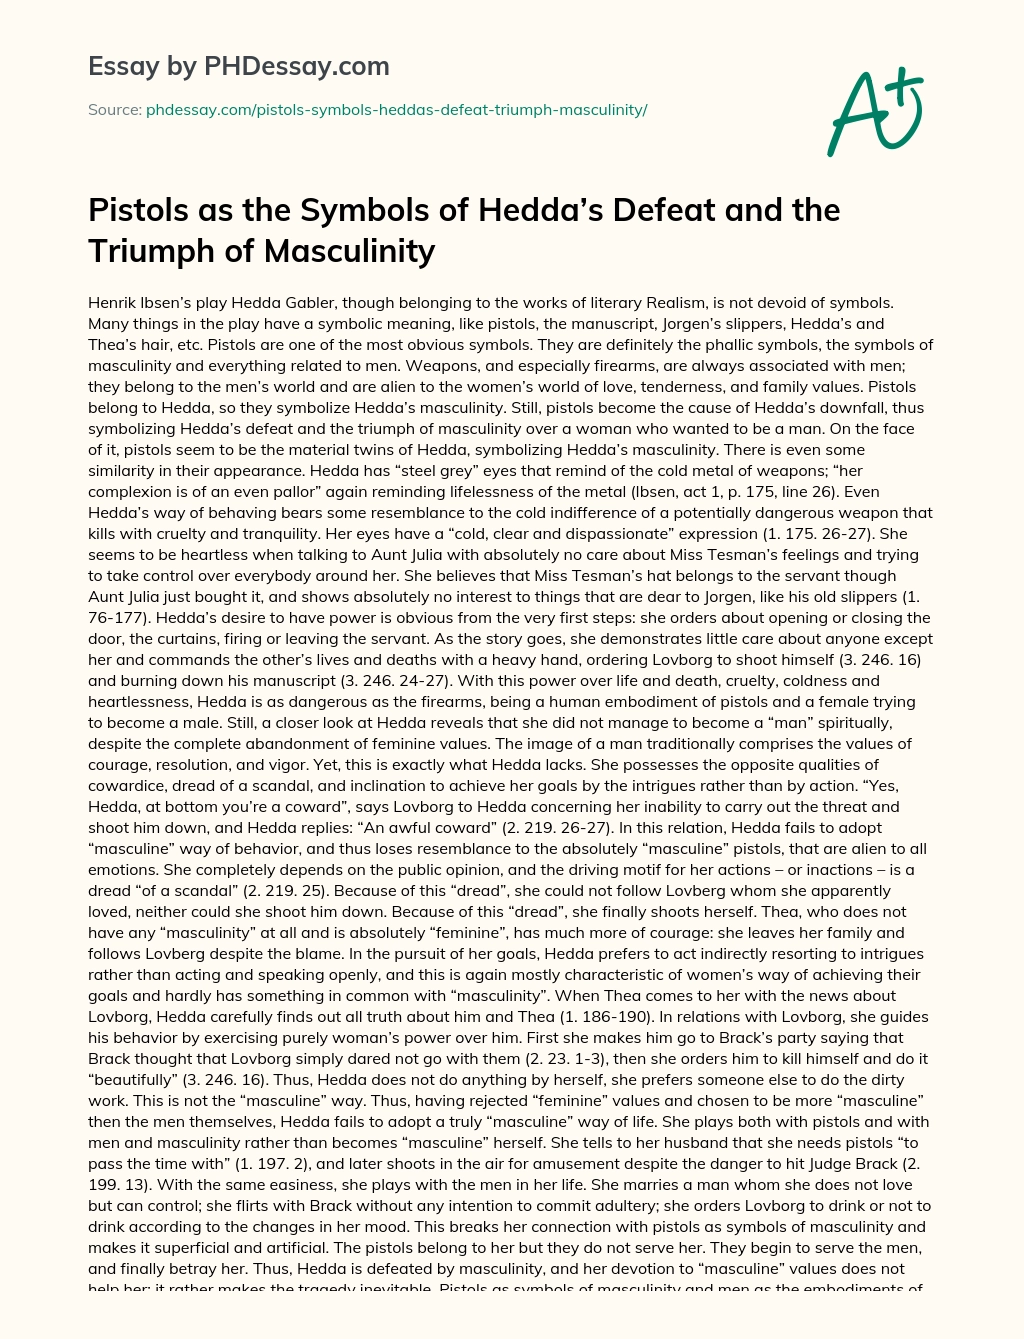 Pistols as the Symbols of Hedda’s Defeat and the Triumph of Masculinity essay